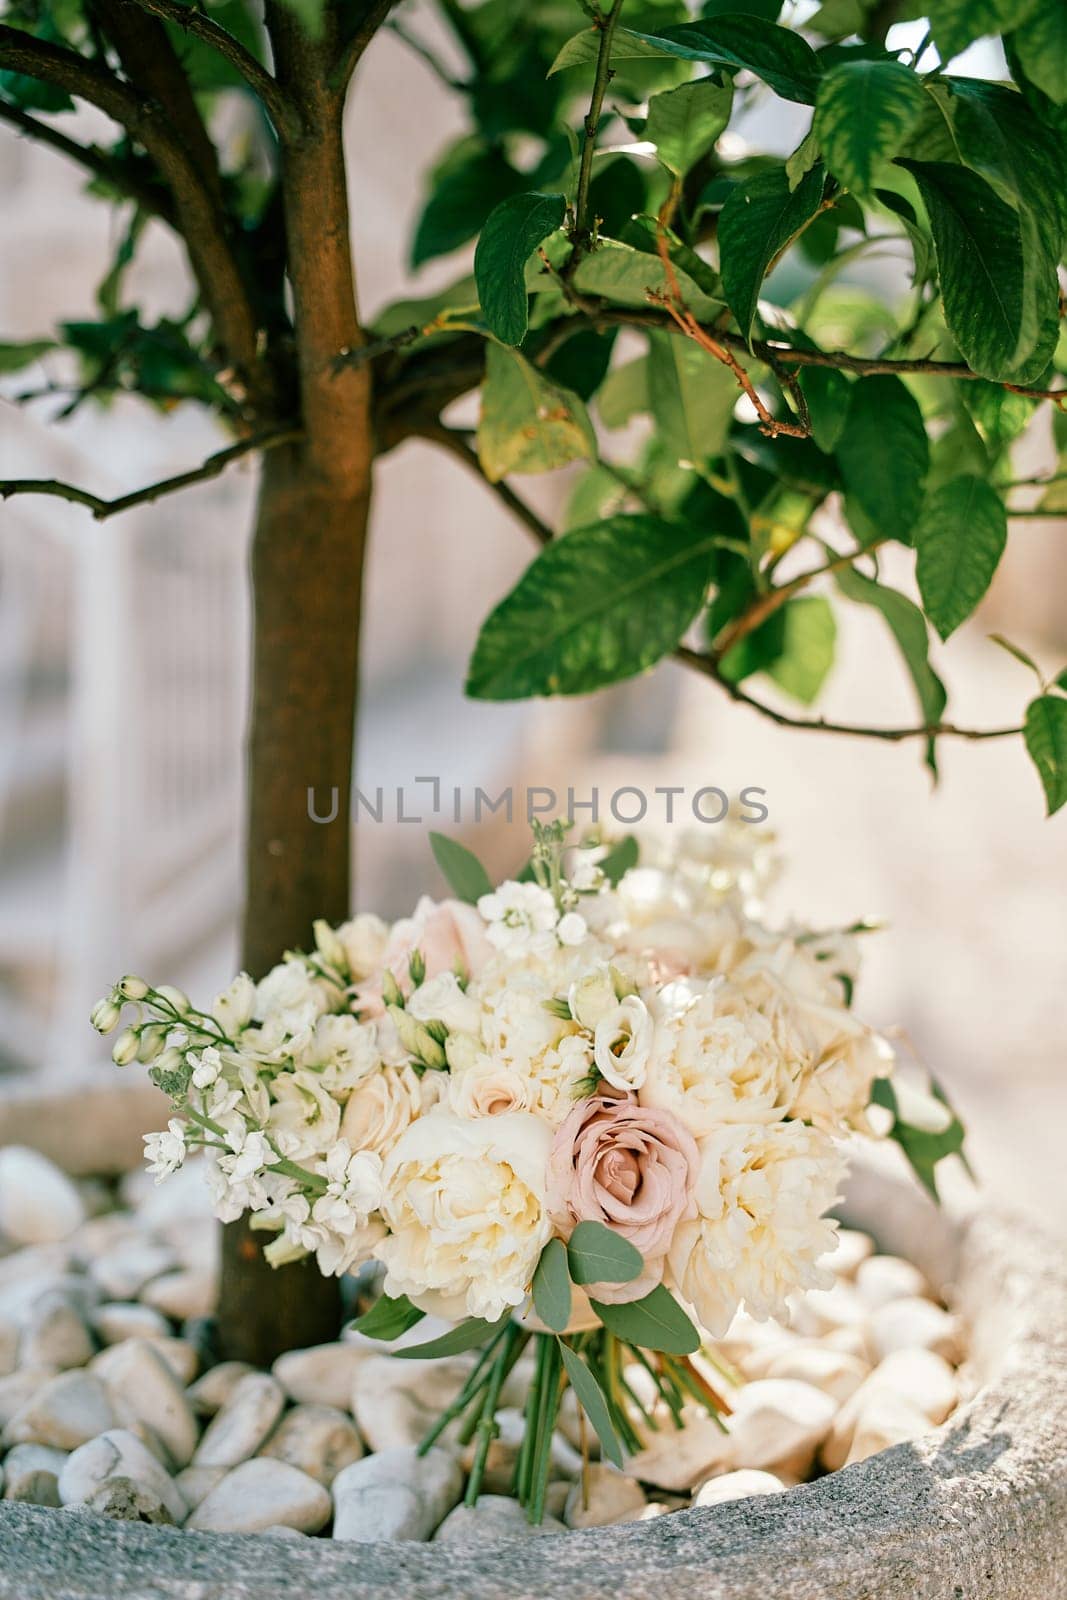 Bride bouquet stands on pebbles under a green tree in a flowerpot. High quality photo